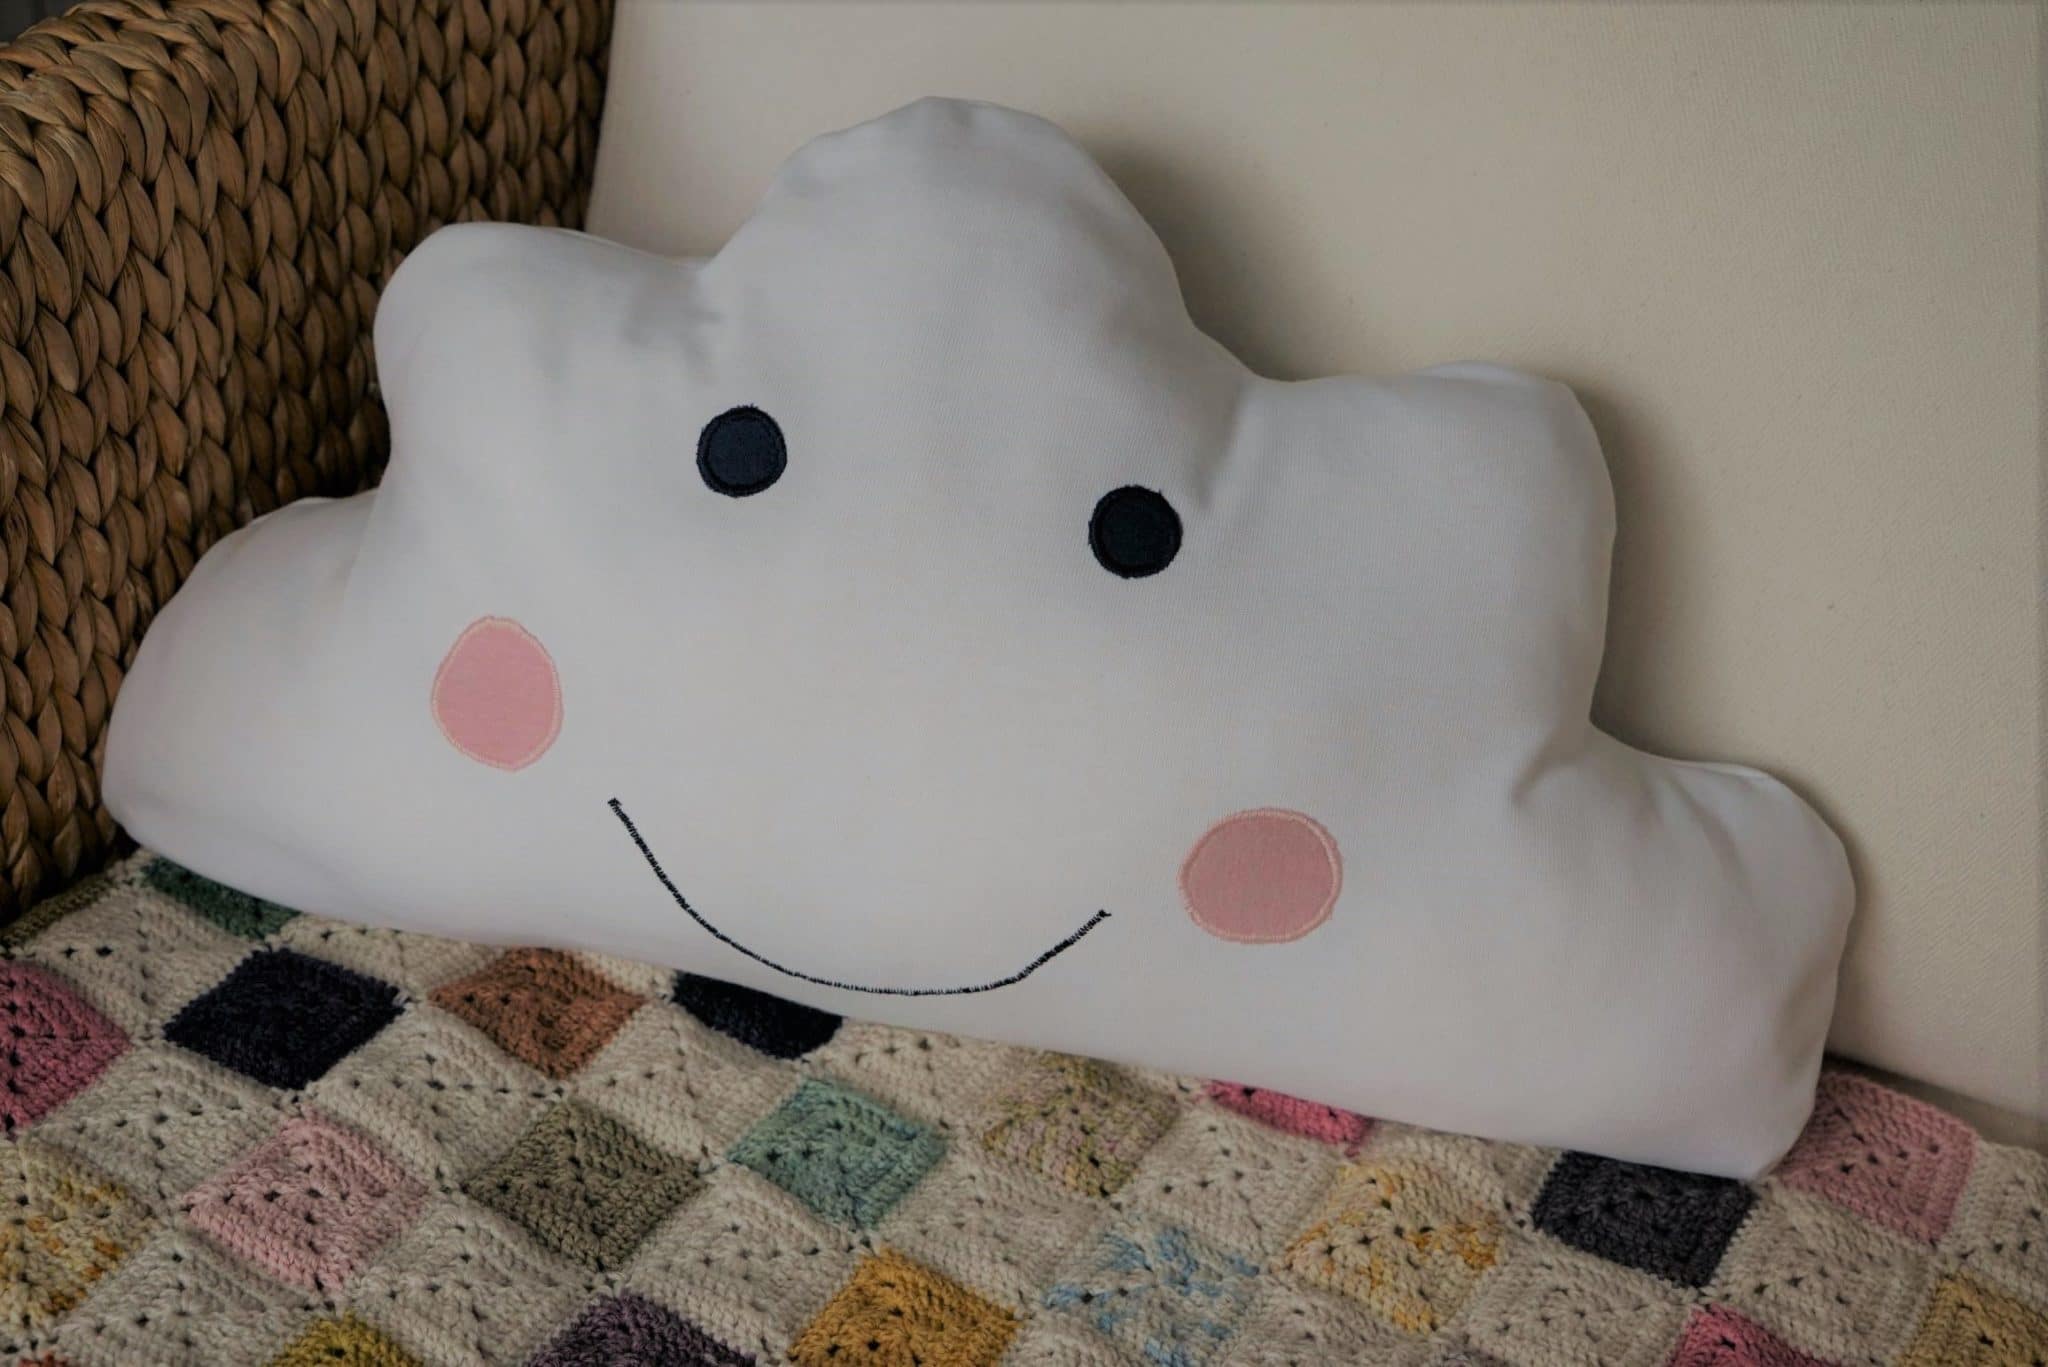 How to sew a cloud pillow - Rosemary And Pines Fiber Arts